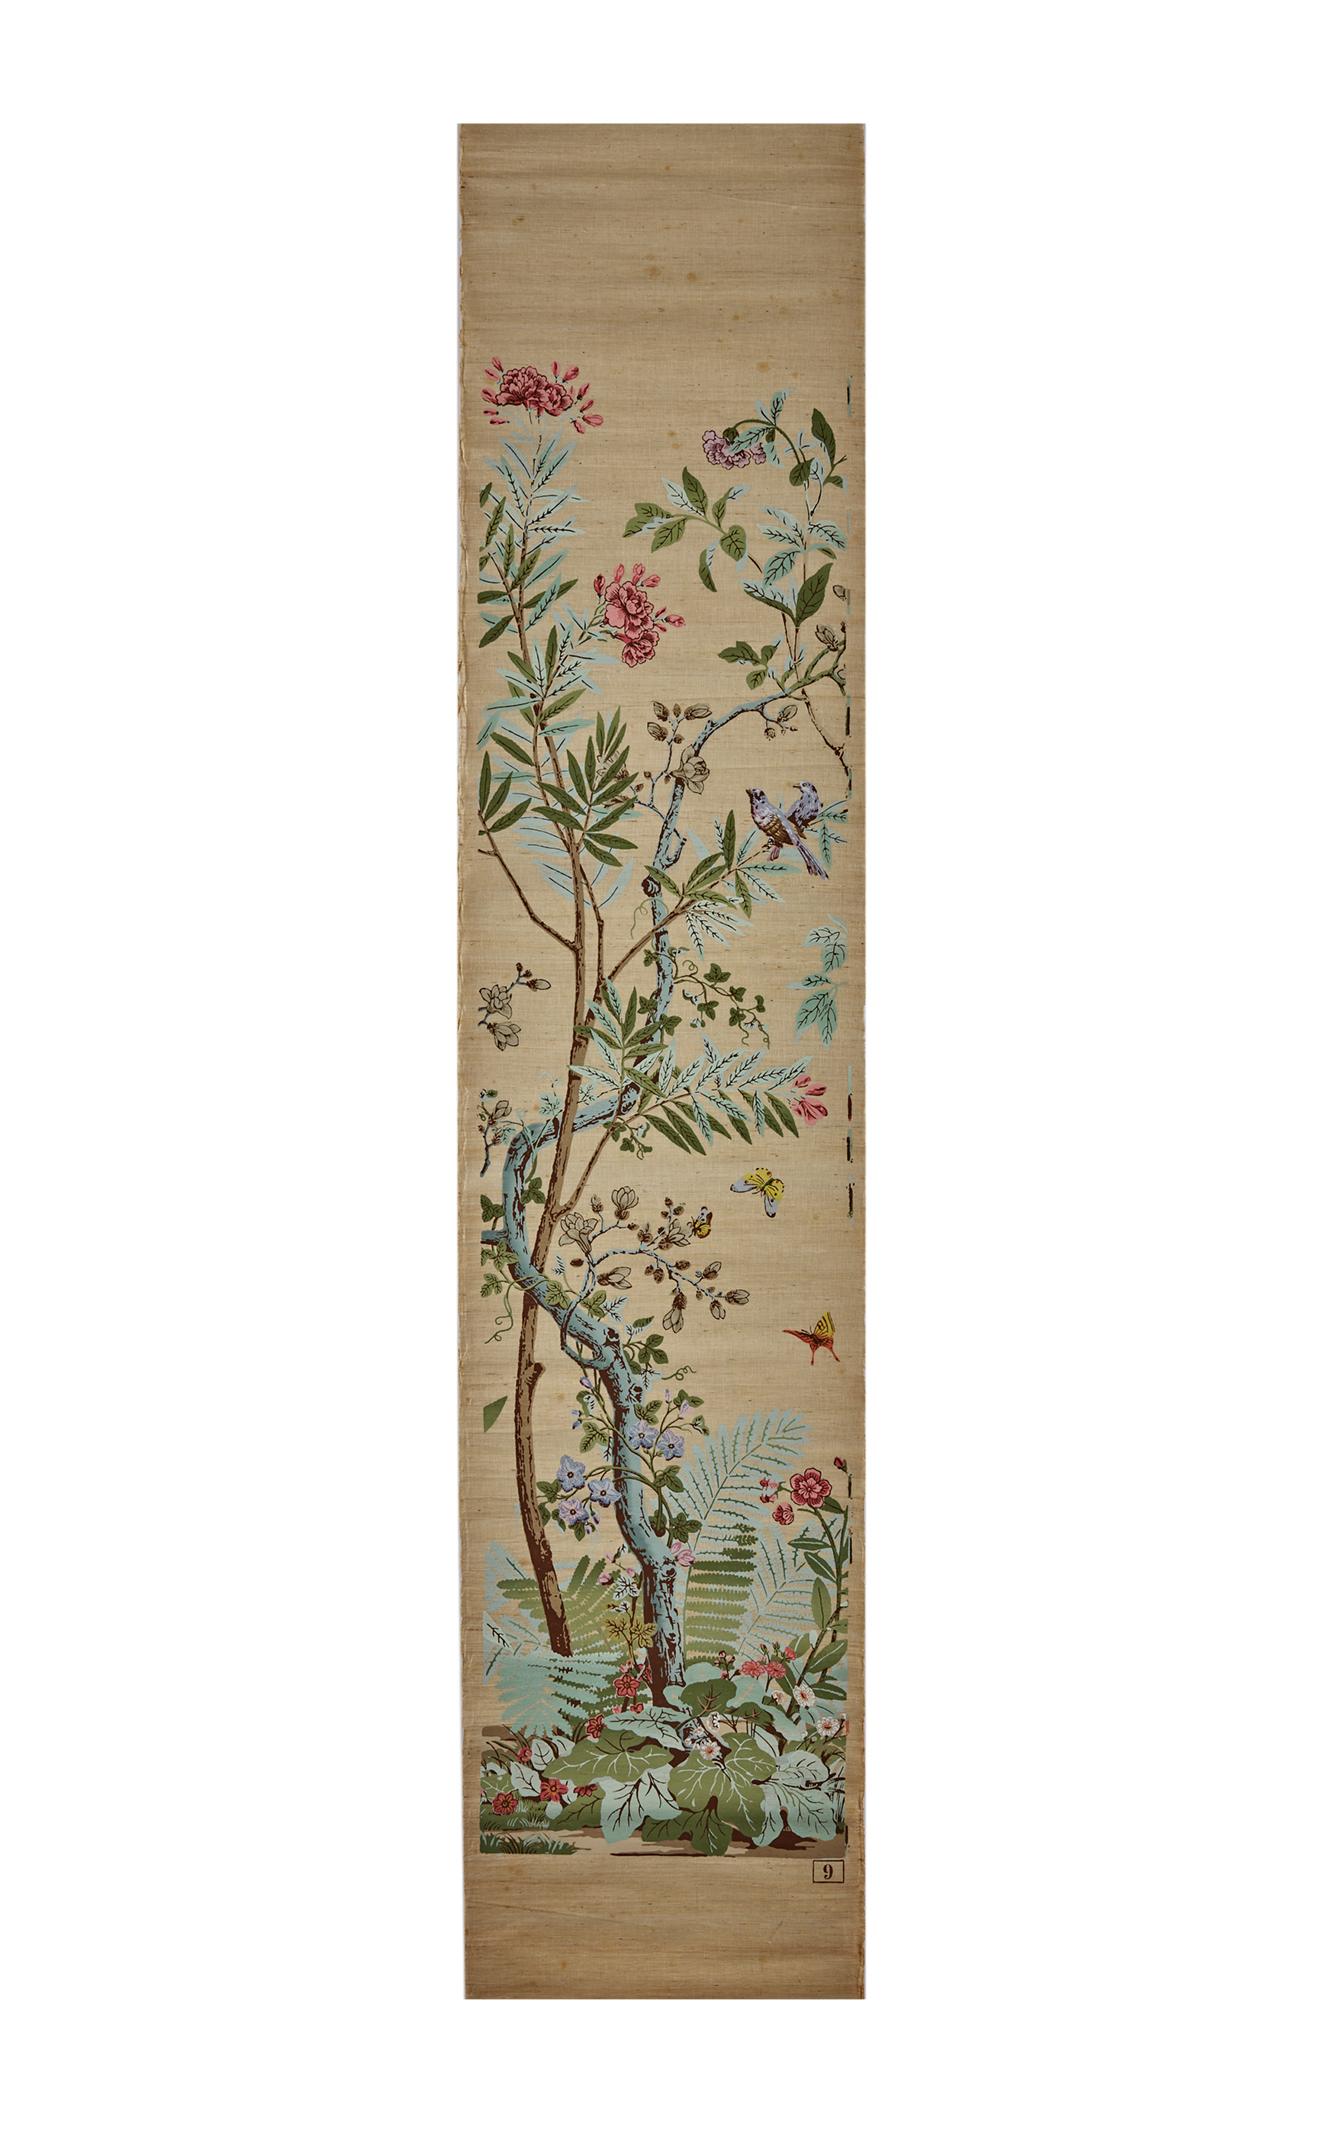 Chinoiserie Zuber, 'Decor Chinois' Hand Wood Blocked on Grasscloth Scenic Wallpaper For Sale